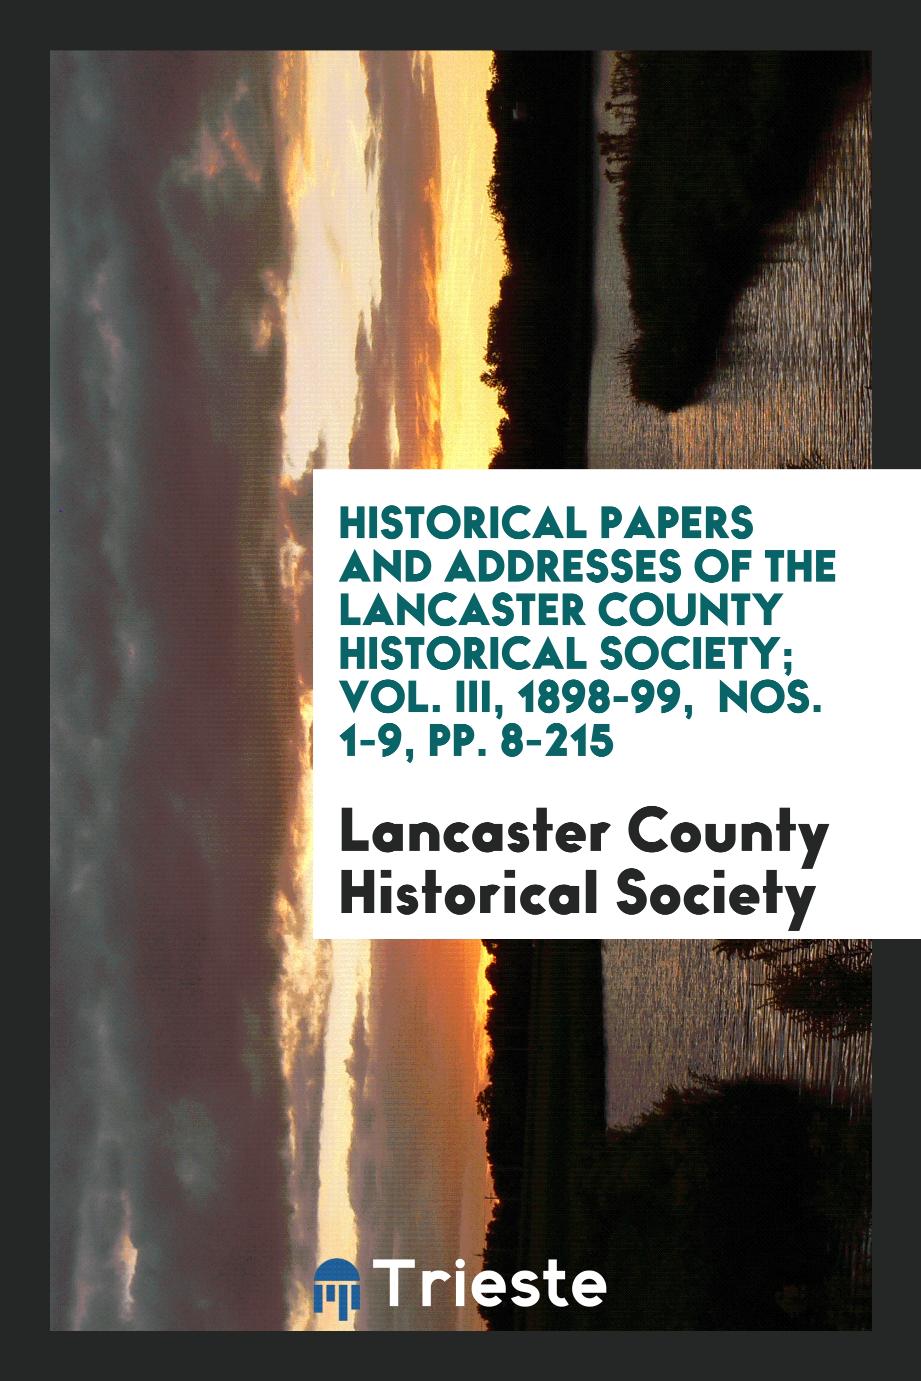 Historical Papers and Addresses of the Lancaster County Historical Society; Vol. III, 1898-99, Nos. 1-9, pp. 8-215